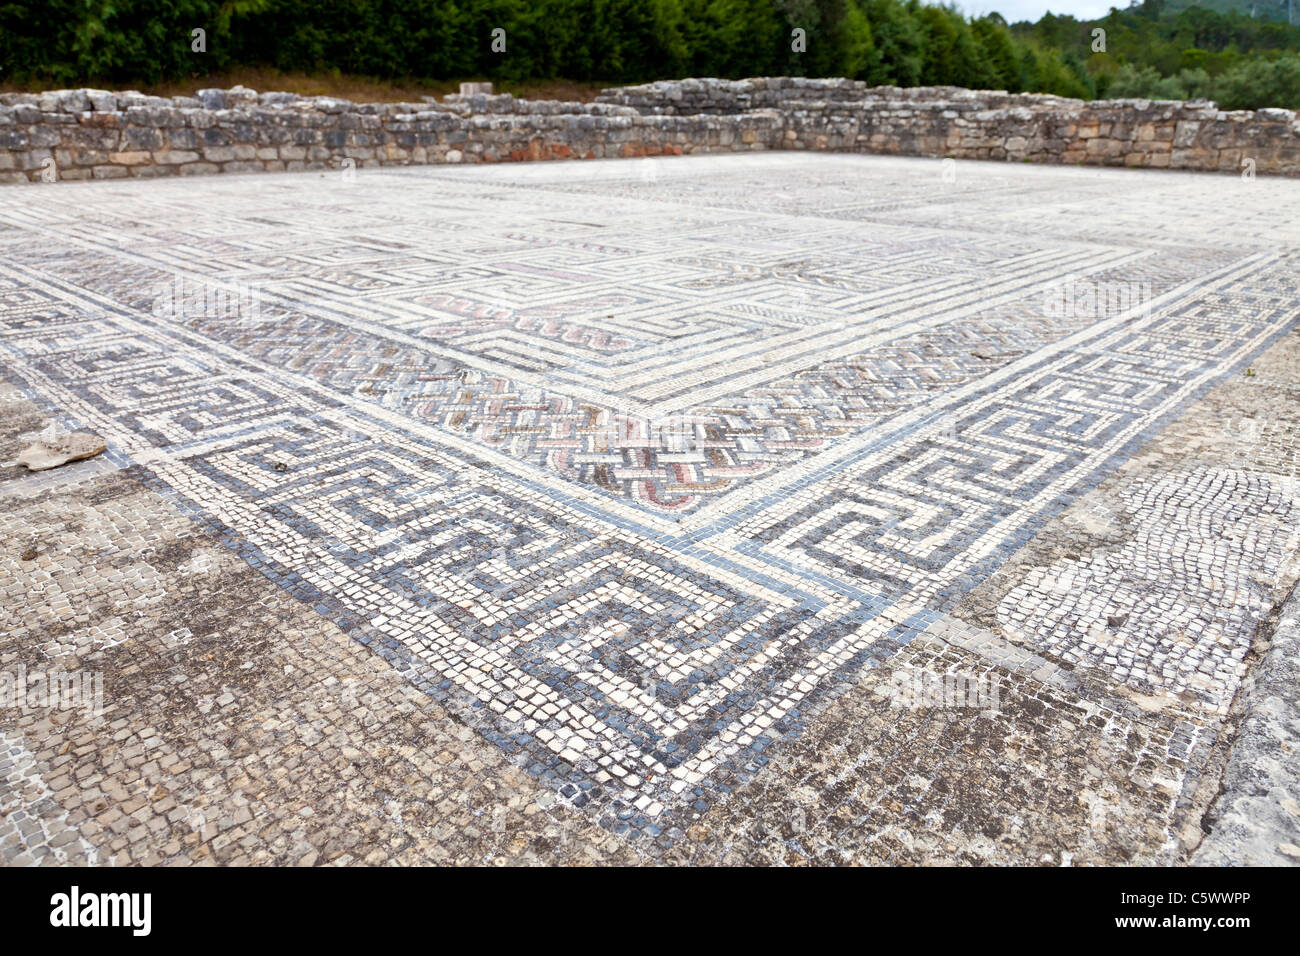 Swastika Mosaics in the House of the Swastika Villa in Conimbriga, the best preserved Roman city ruins in Portugal. Stock Photo